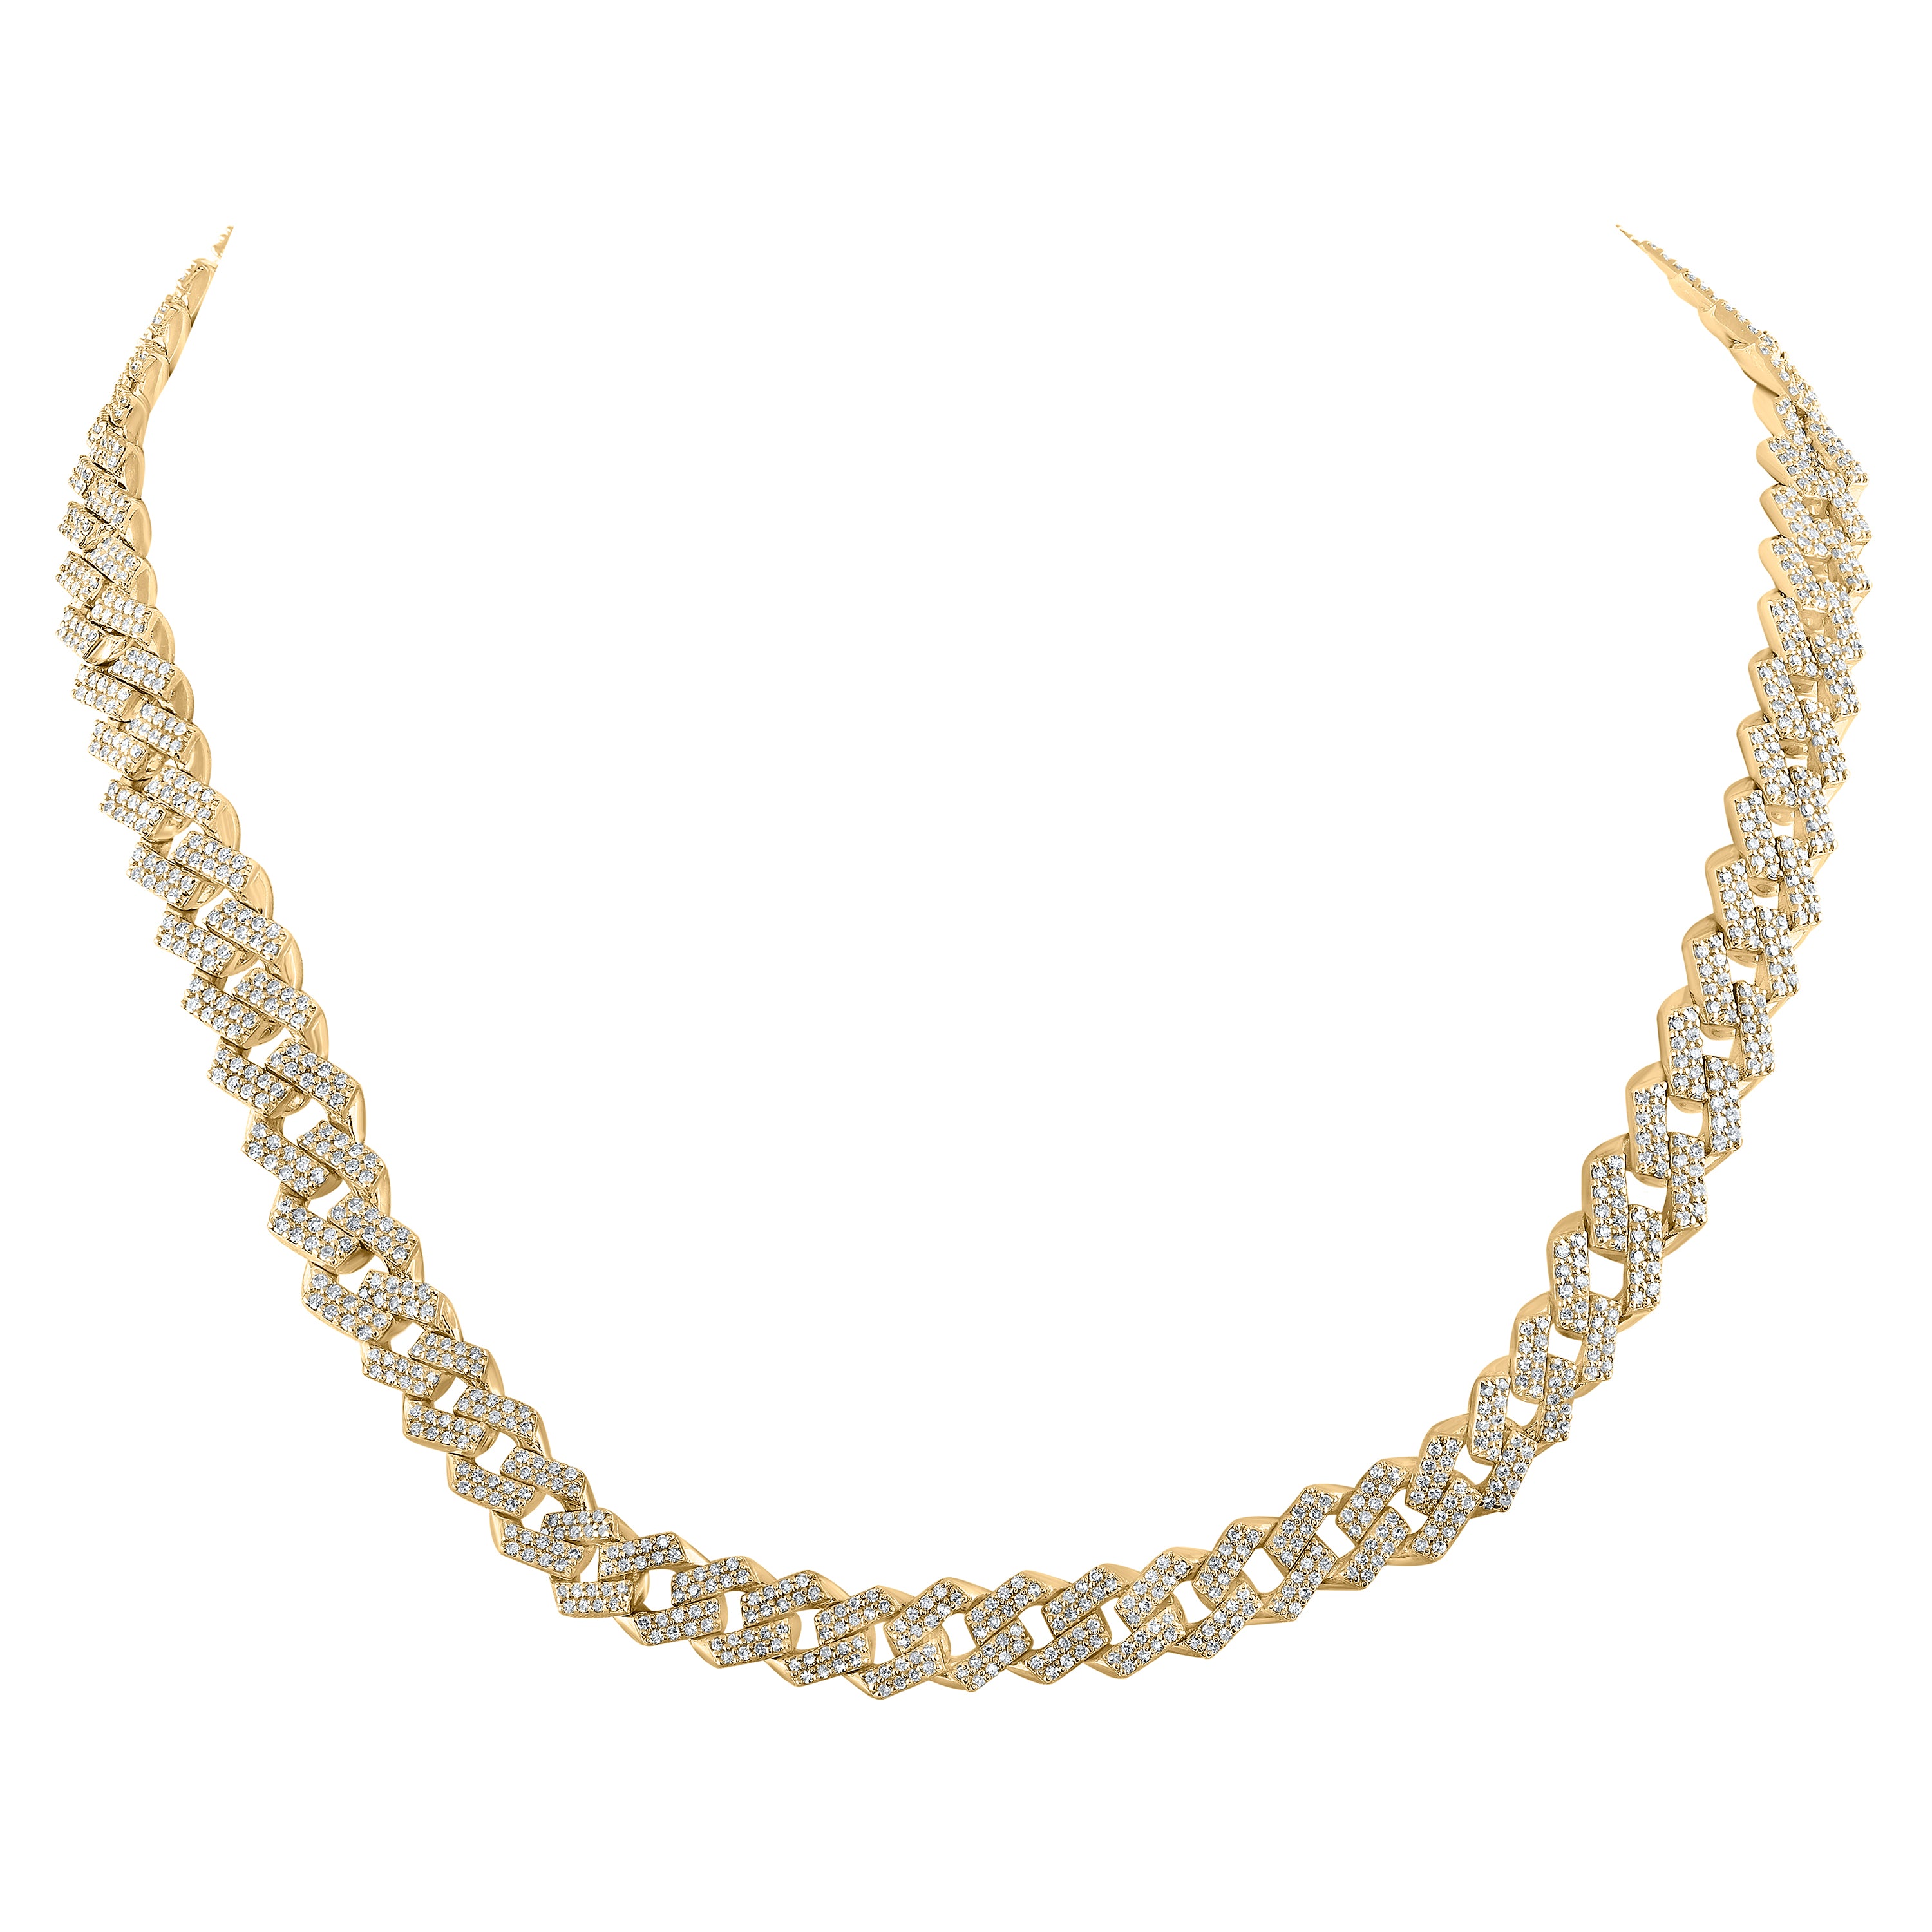 10Kt Yellow Gold 7 1/4Ctw-Dia Nk (8Mm) Mens Chain (20 Inch)